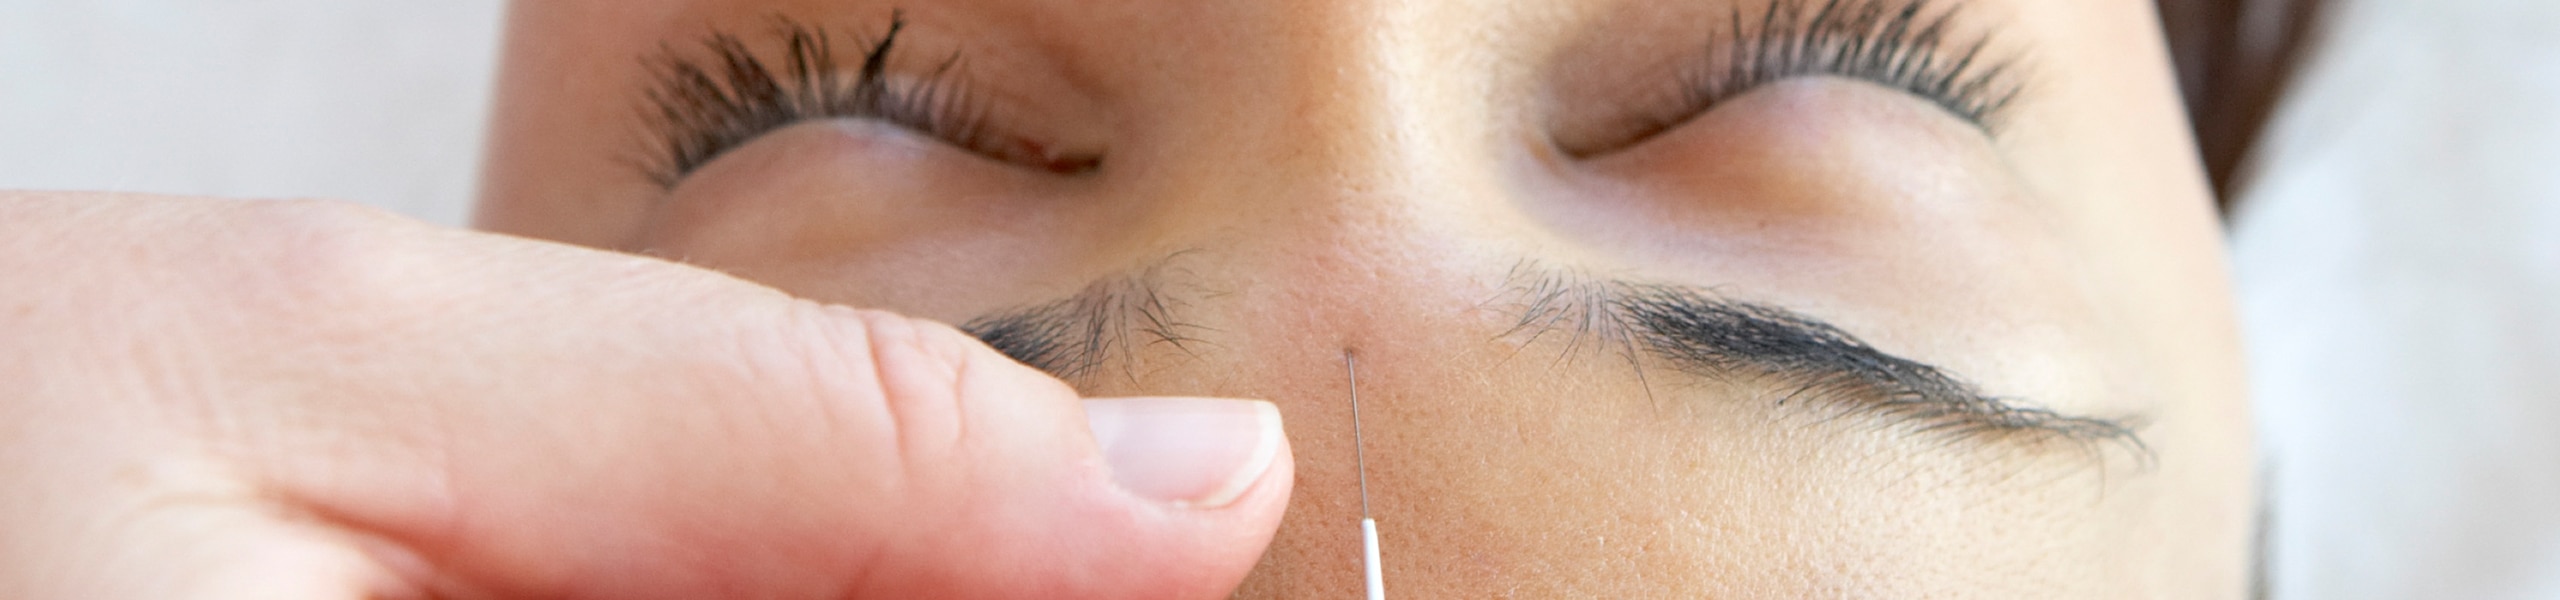 acupuncture-needle-forehead